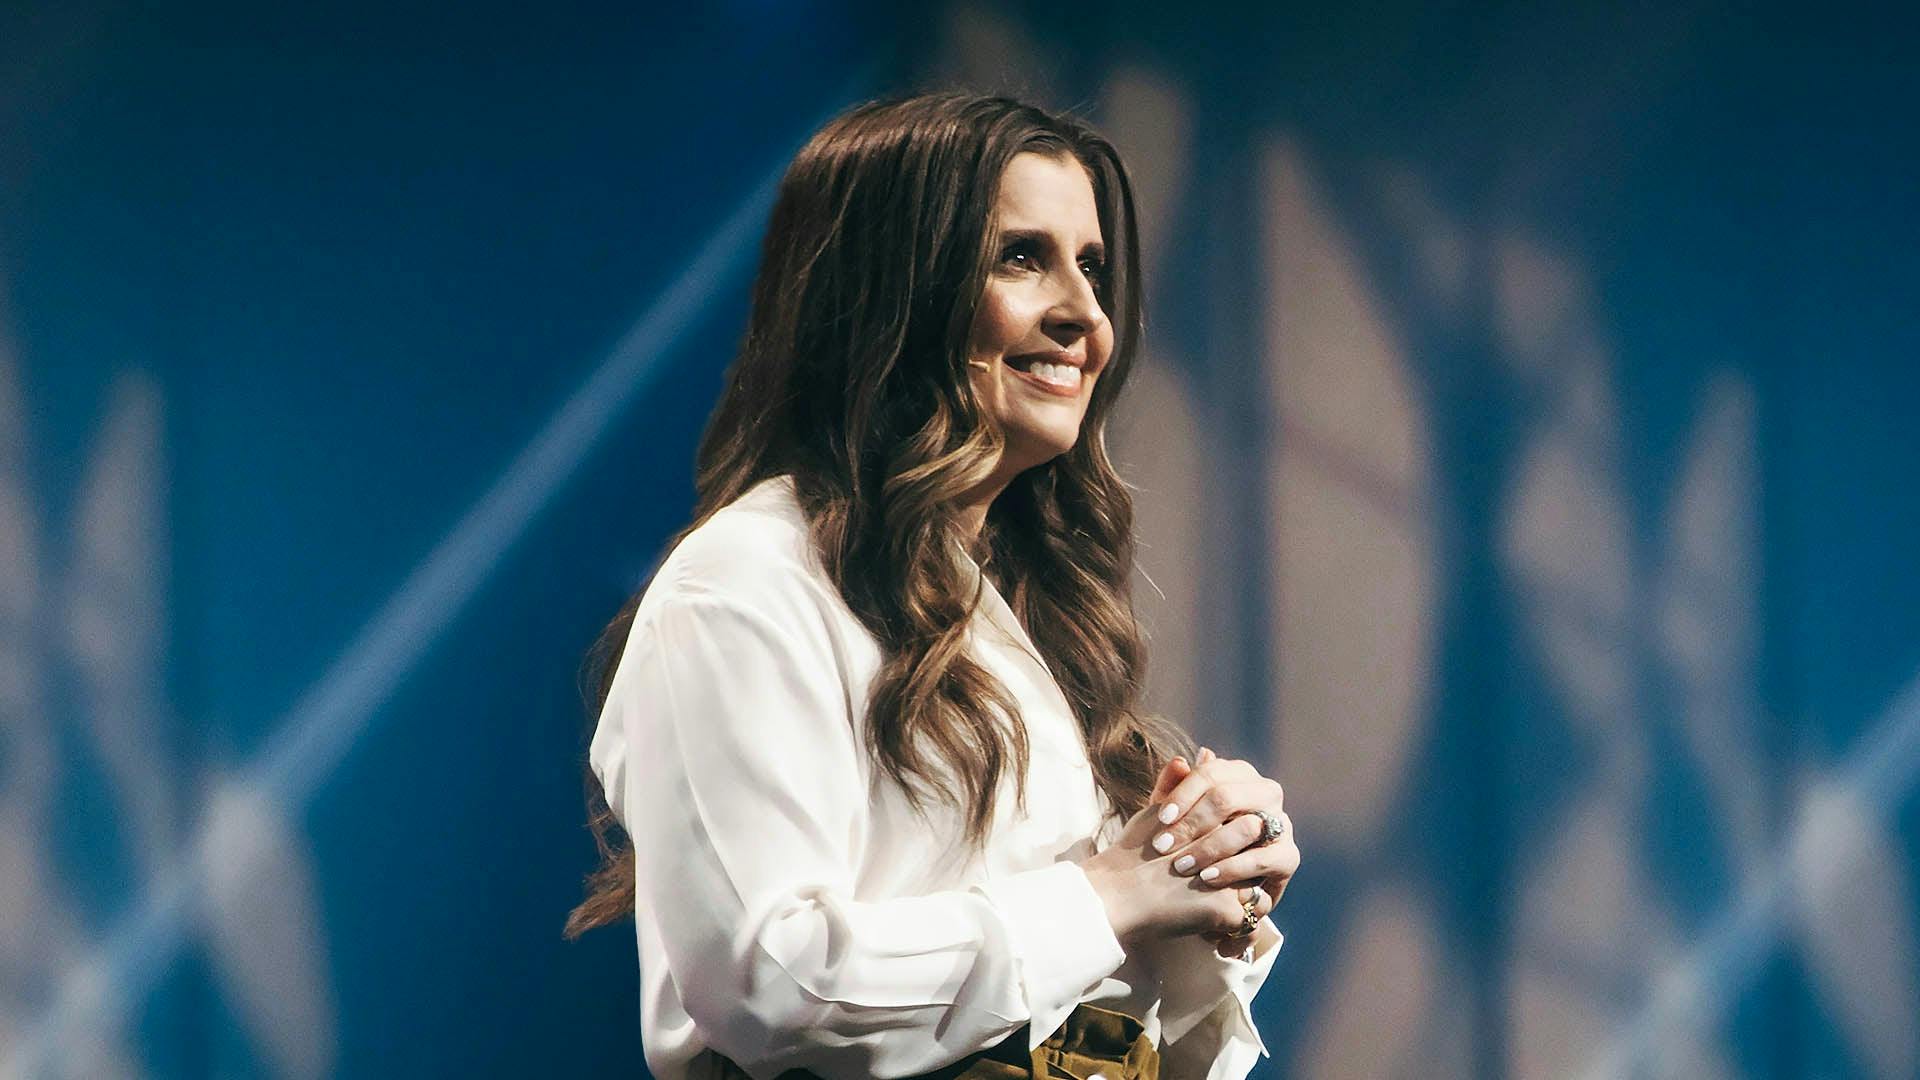 Holly Furtick preaching "I Don’t Think I’m Ready For This" at Elevation Church